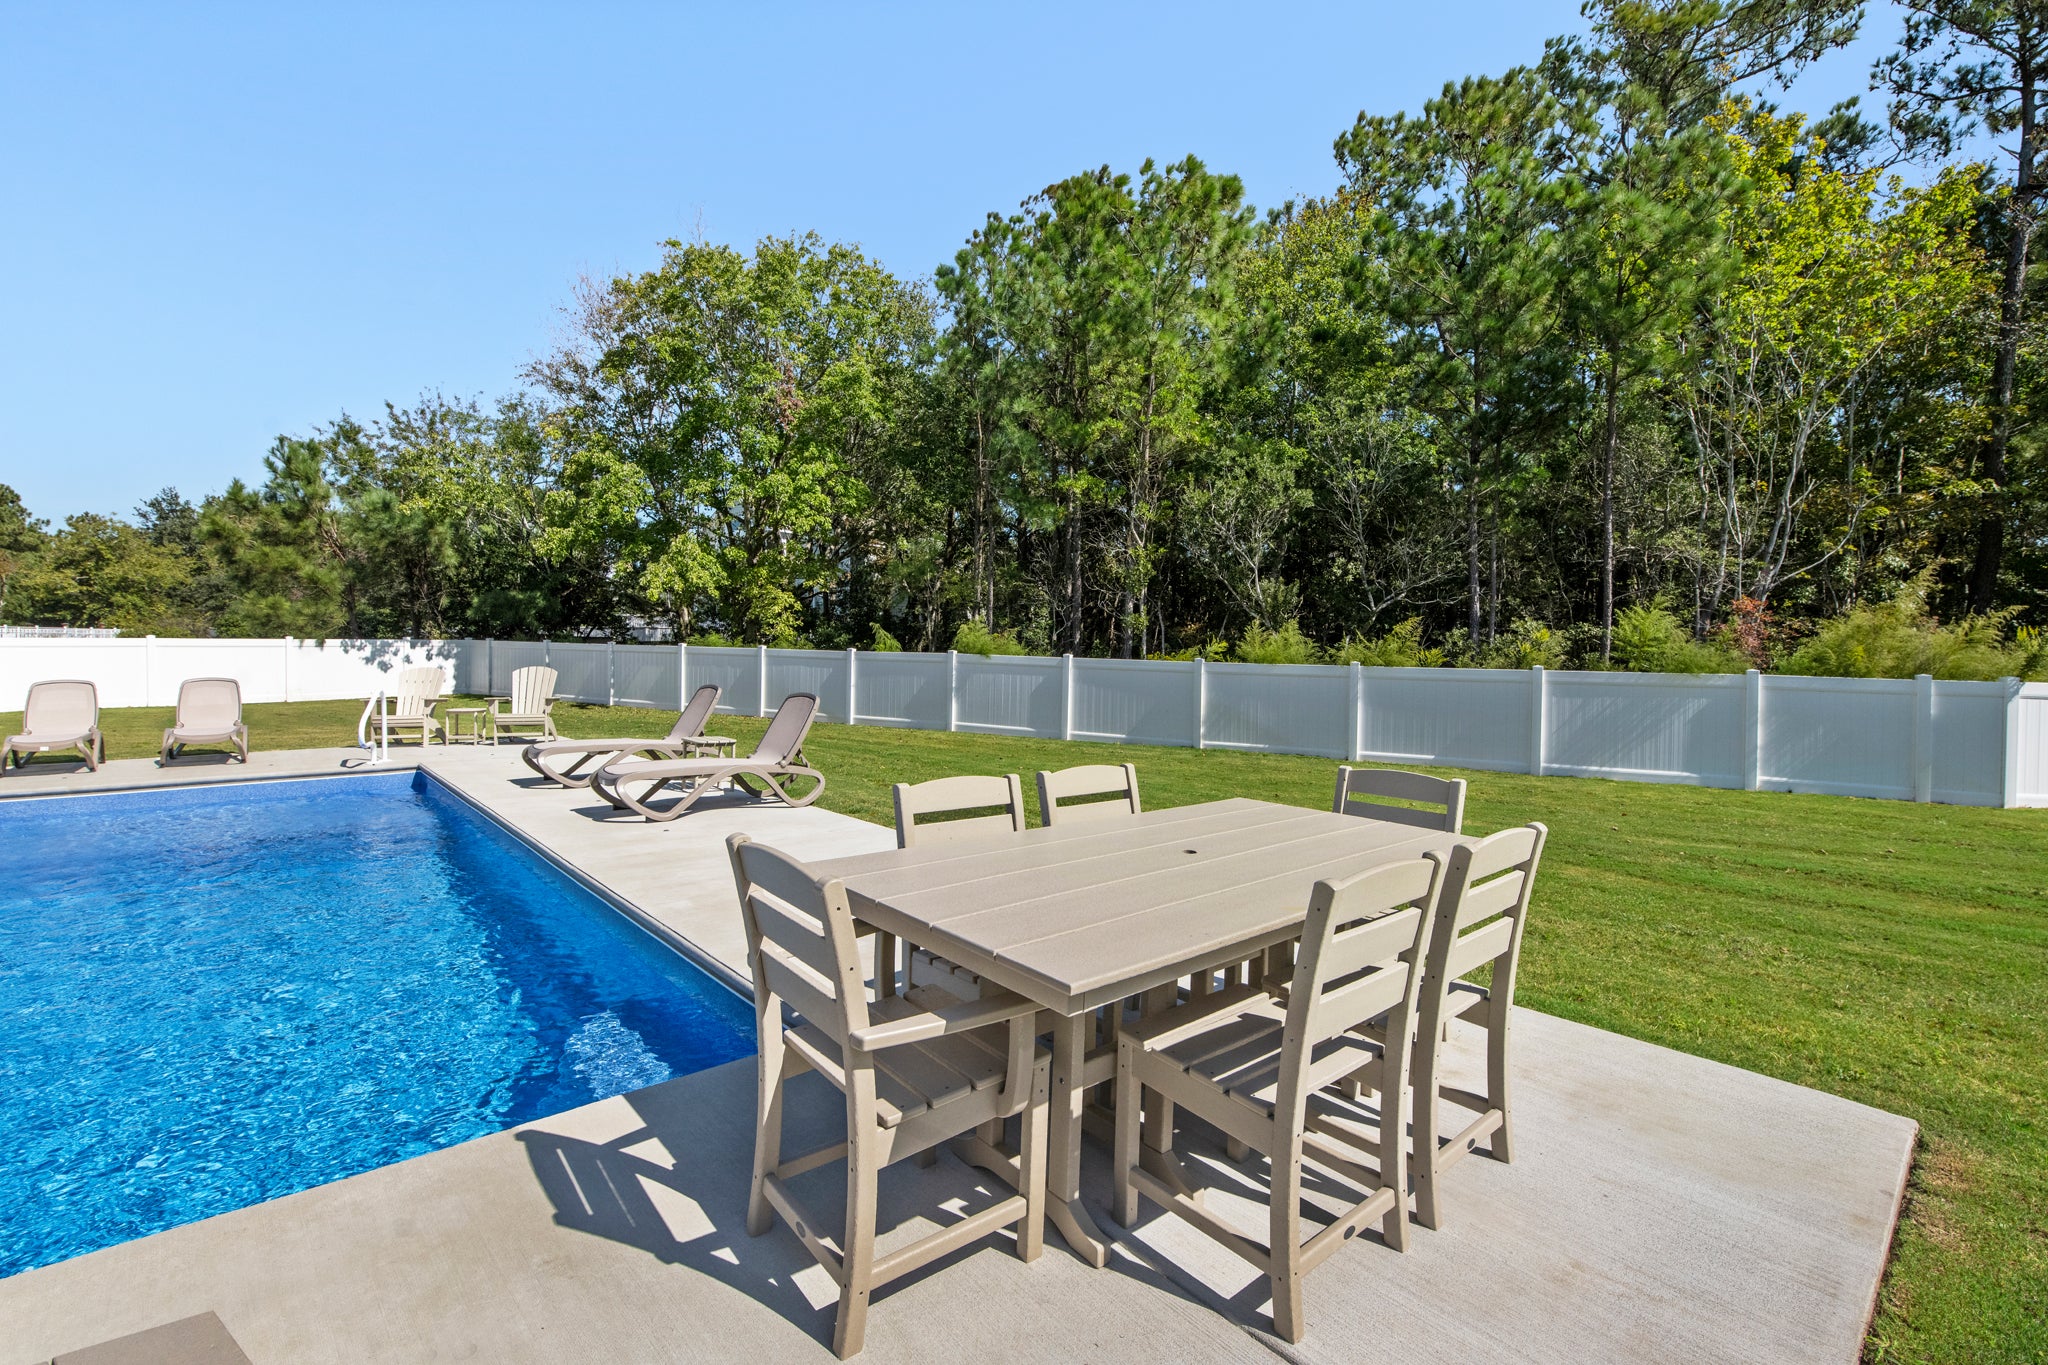 CC420: Shell's By The Seashore | Pool Area w/ Outdoor Dining Set